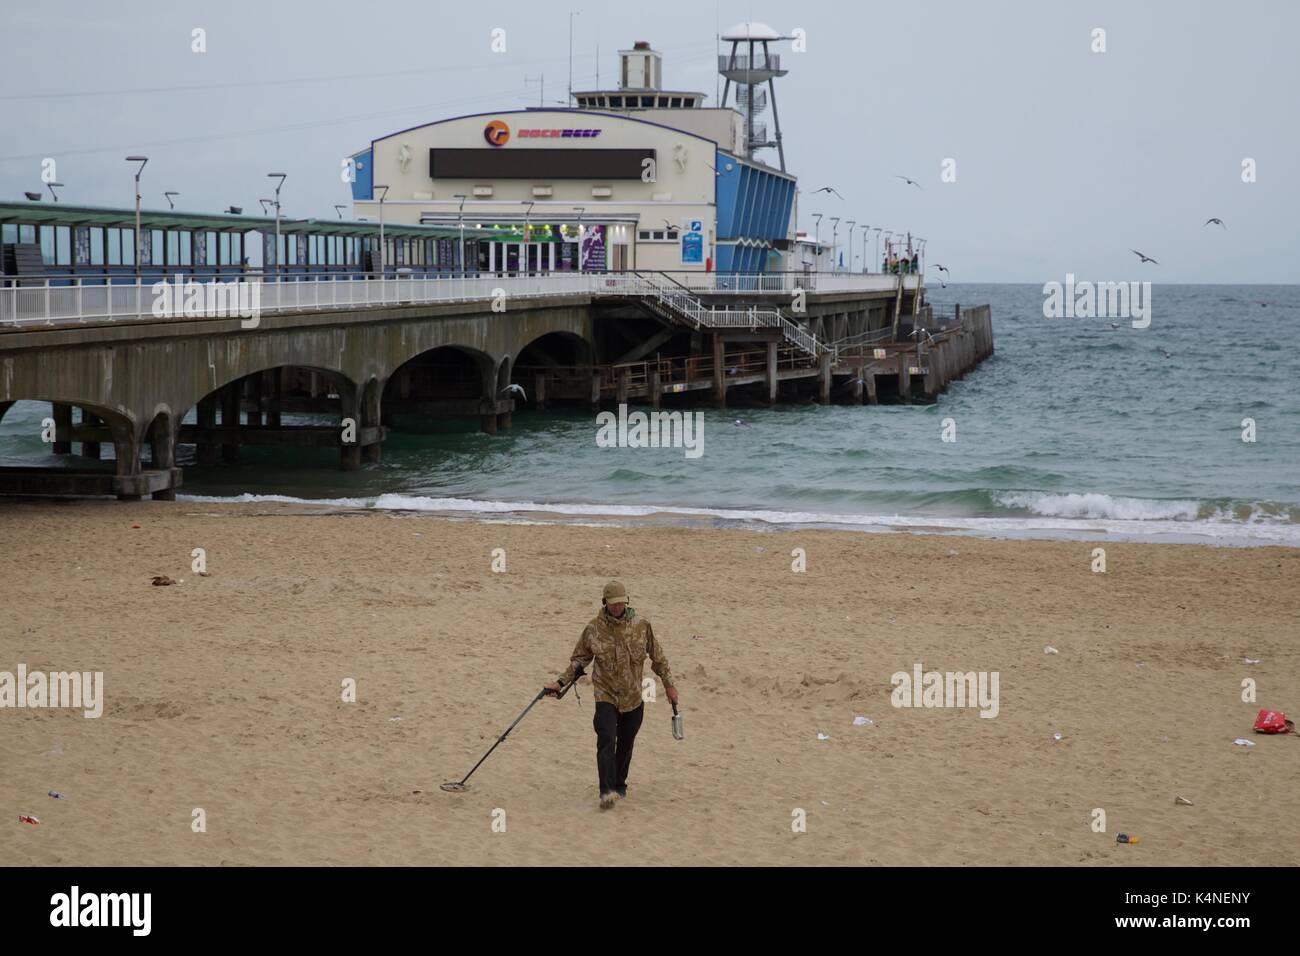 Man using a metal detector on Bournemouth beach with the Bournemouth pier in the background Stock Photo